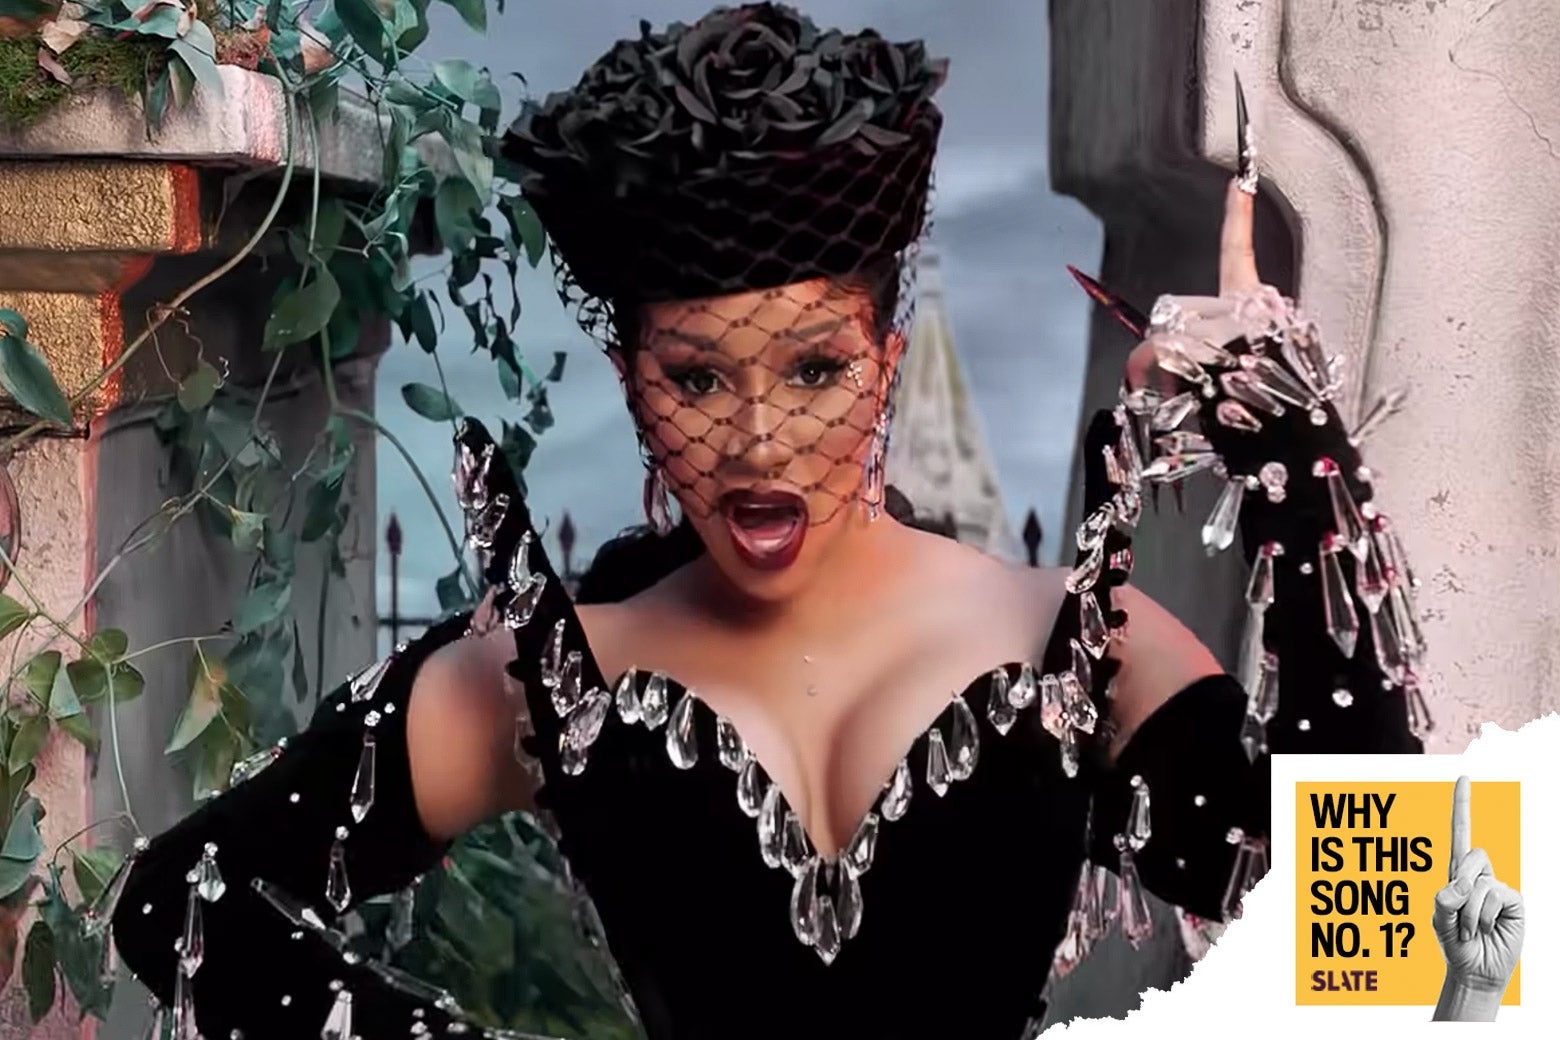 Cardi B in a black dress decorated with chandelier crystals.